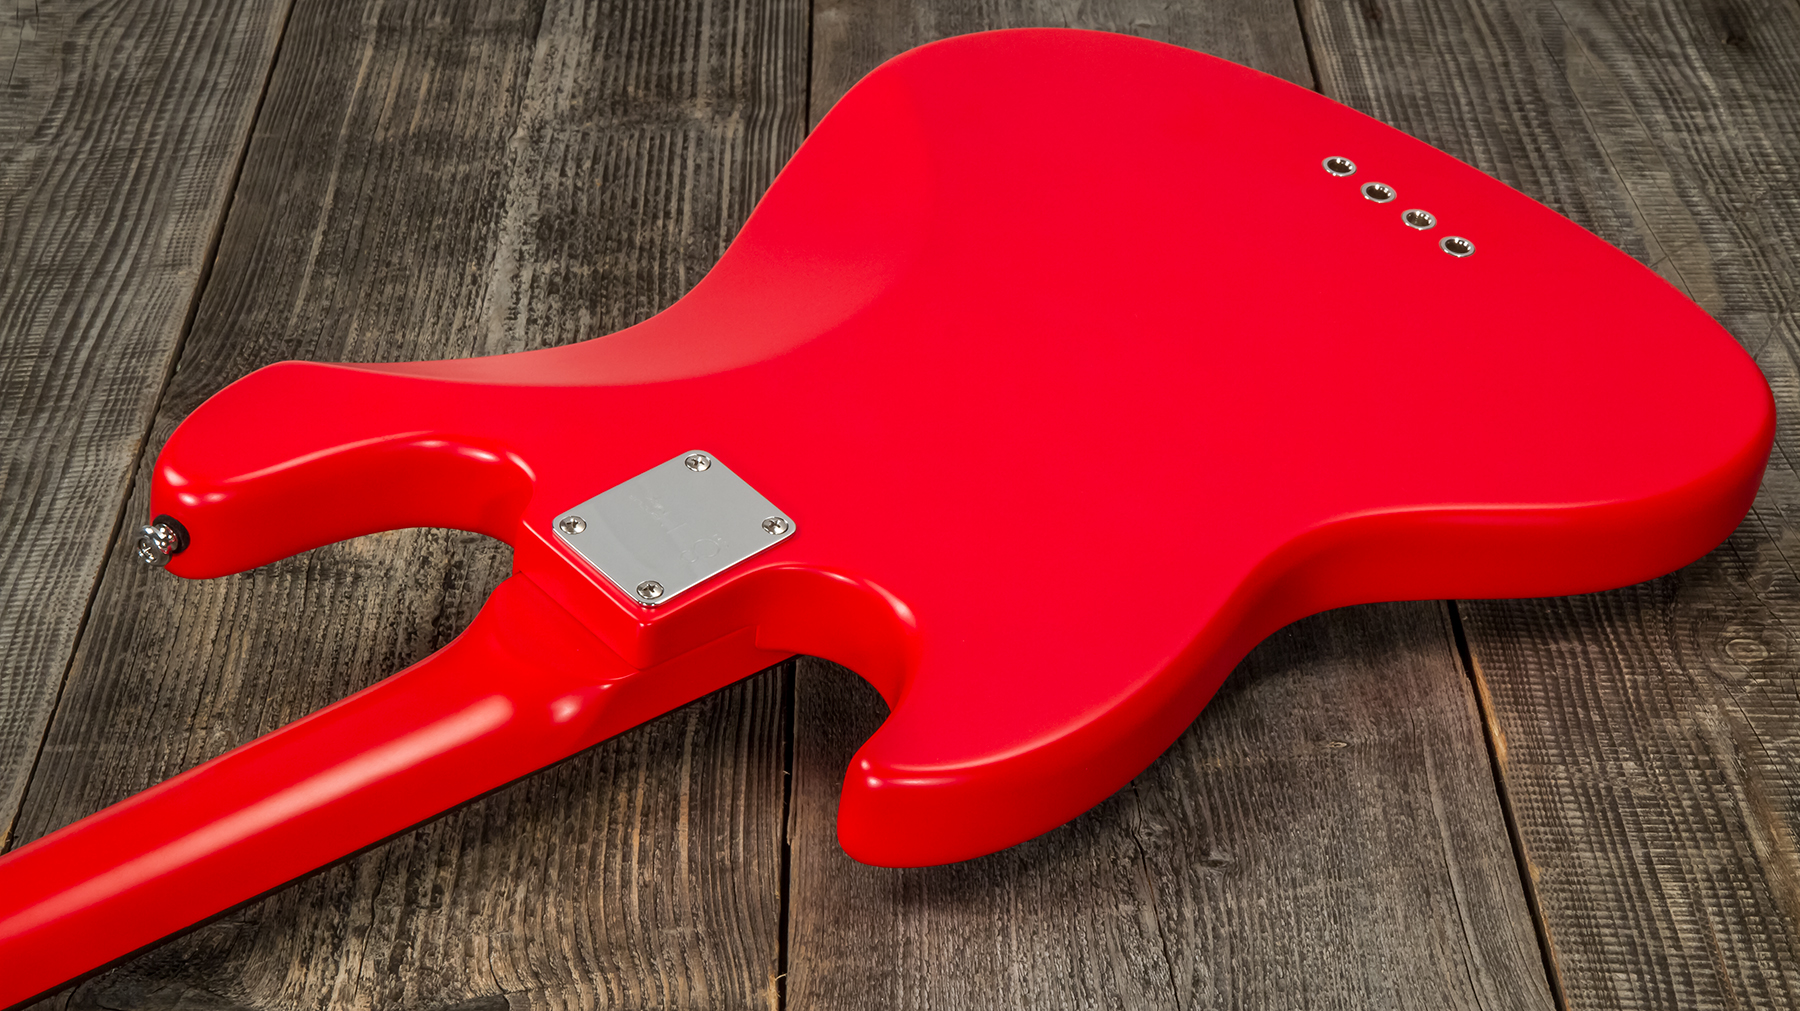 Marcus Miller V3p 4st Rw - Red Satin - Solidbody E-bass - Variation 2